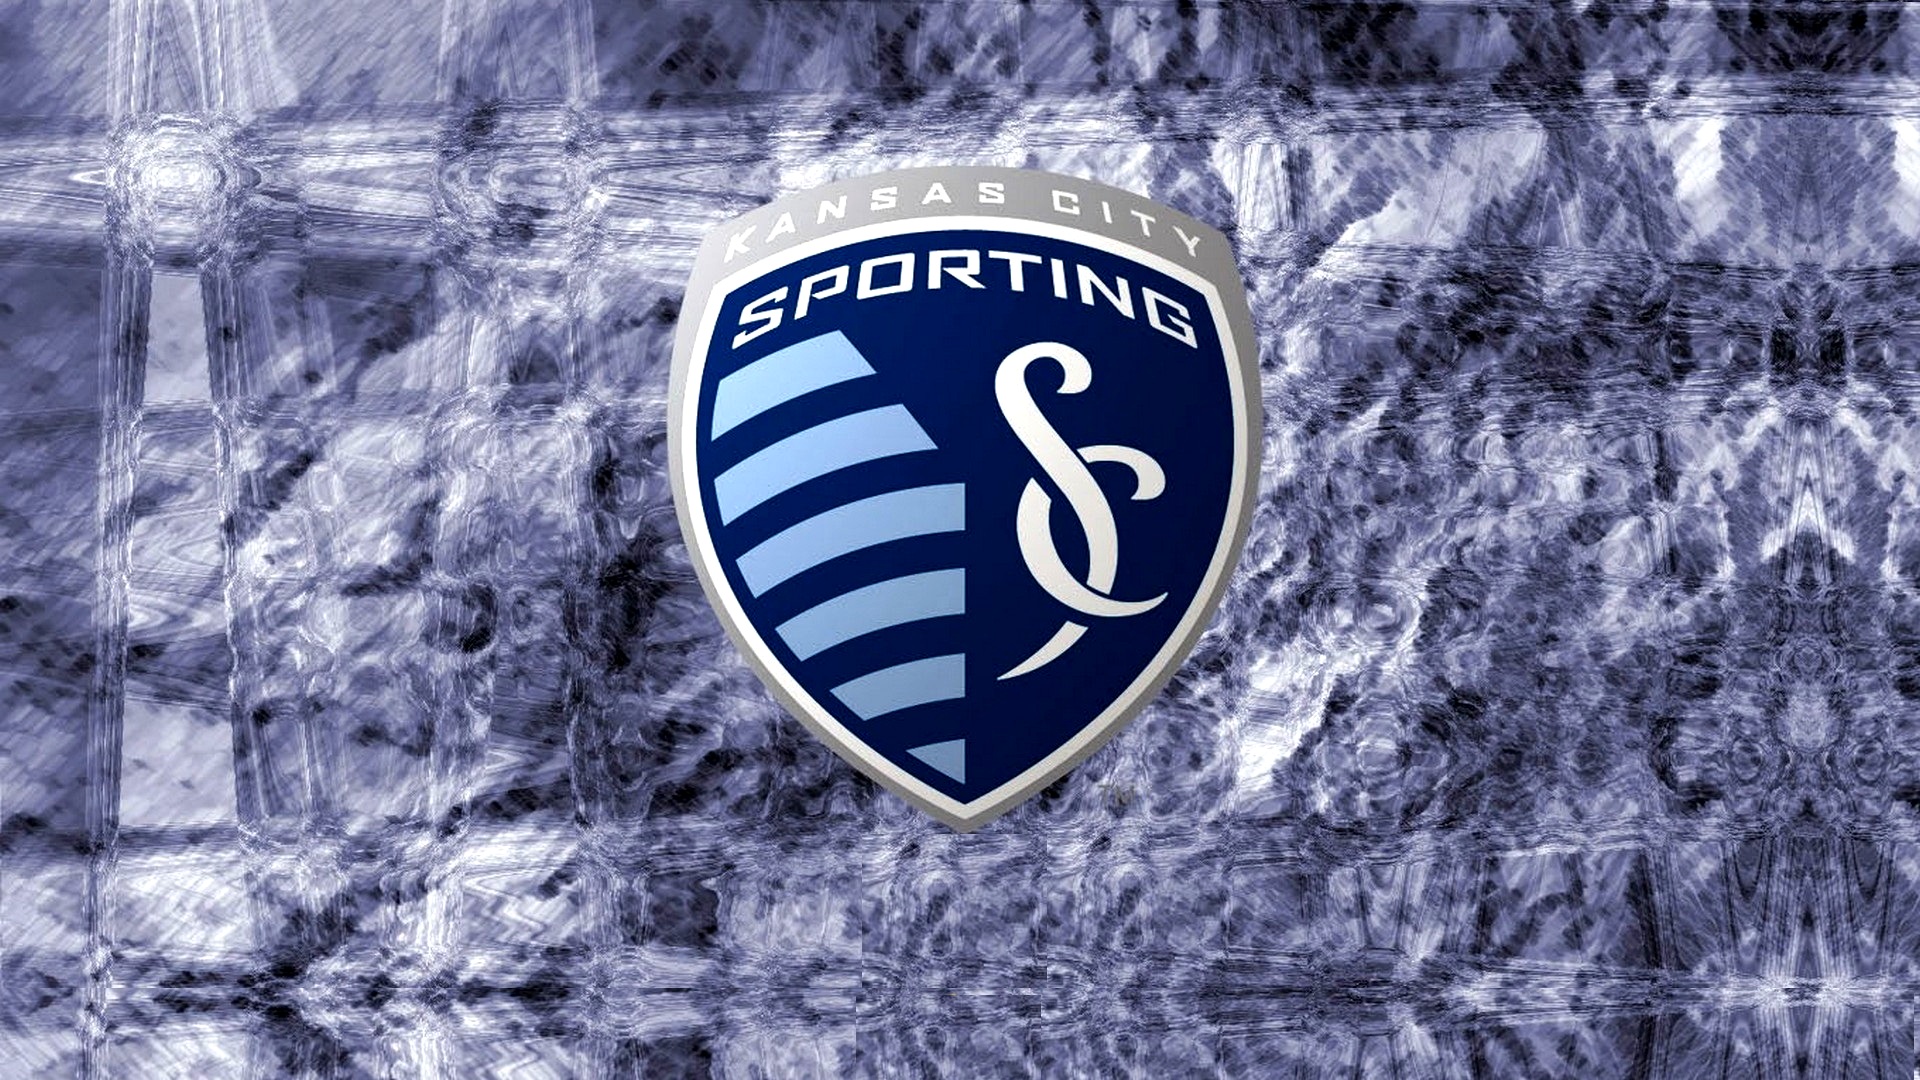 Sporting Kansas City Wallpaper With high-resolution 1920X1080 pixel. You can use this wallpaper for your Desktop Computers, Mac Screensavers, Windows Backgrounds, iPhone Wallpapers, Tablet or Android Lock screen and another Mobile device